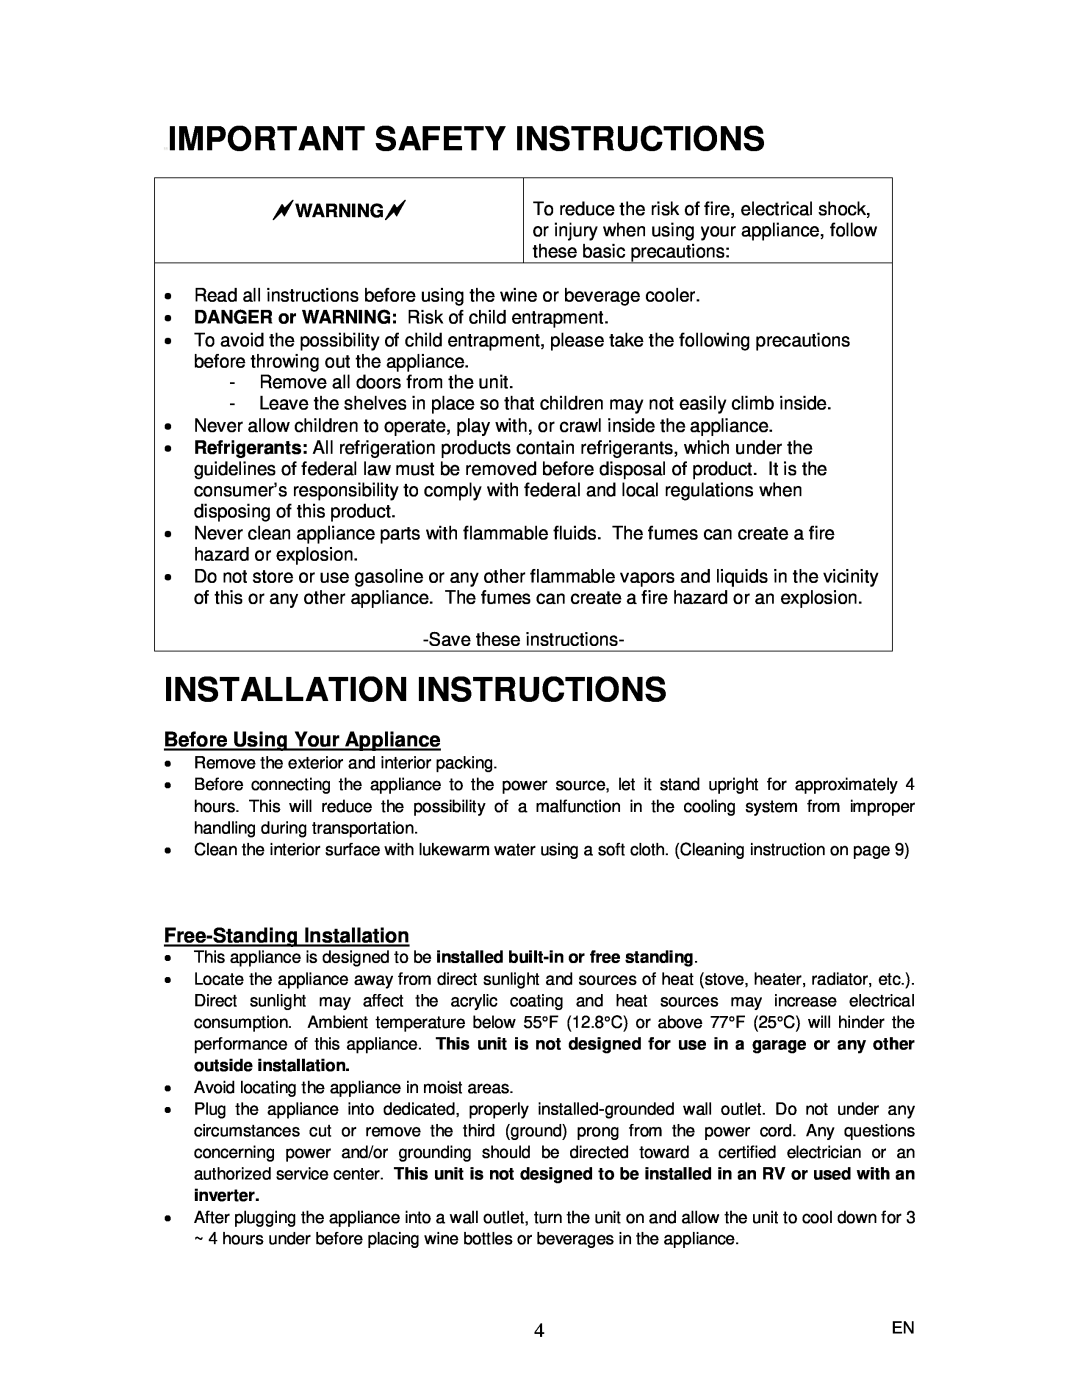 Magic Chef MCBC58DSTF Important Safety Instructions, Installation Instructions, Before Using Your Appliance, Warning 